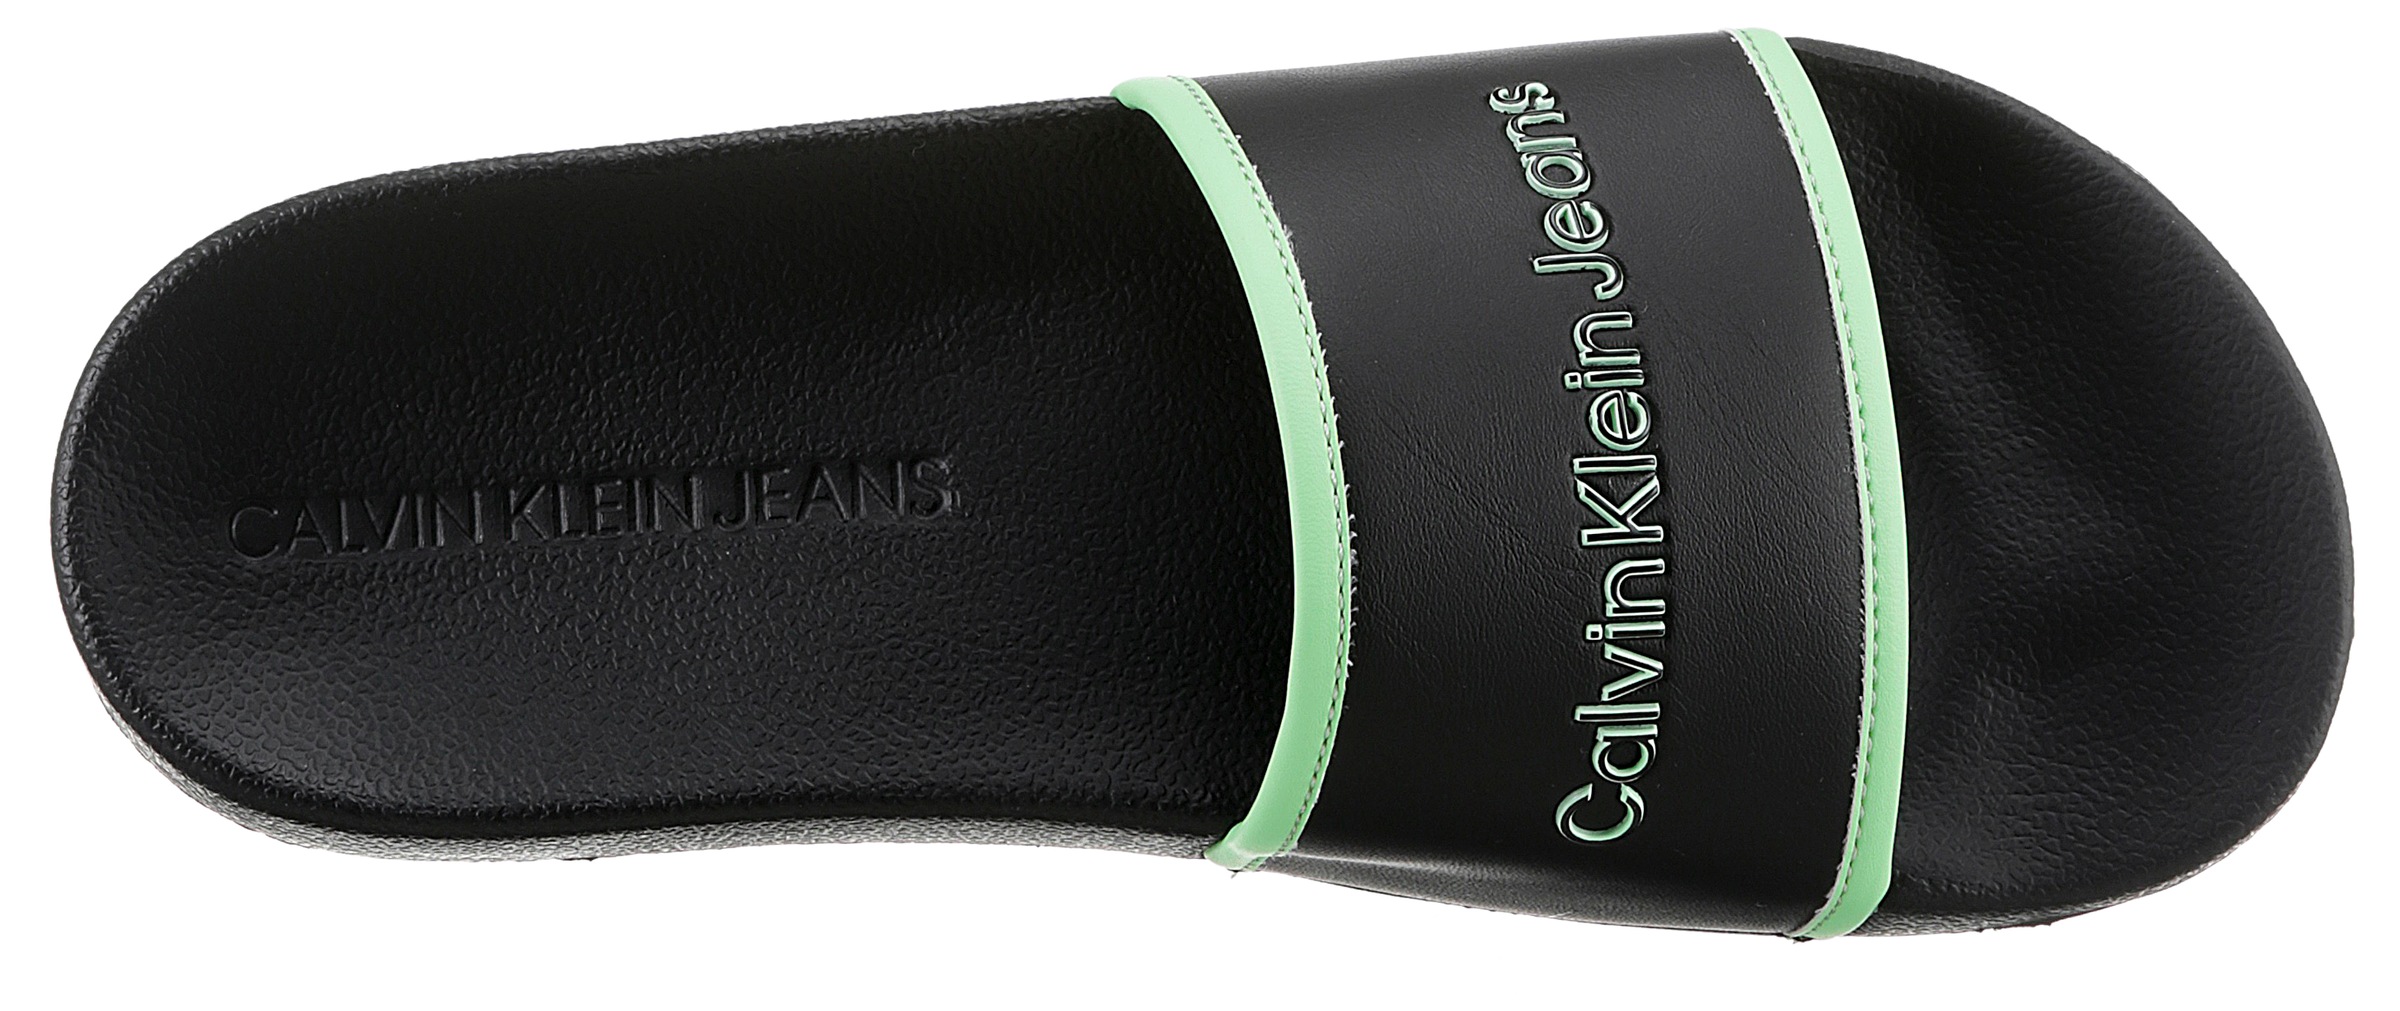 Calvin Klein Jeans Badepantolette »FANNY 5A *I«, in bequemer Form